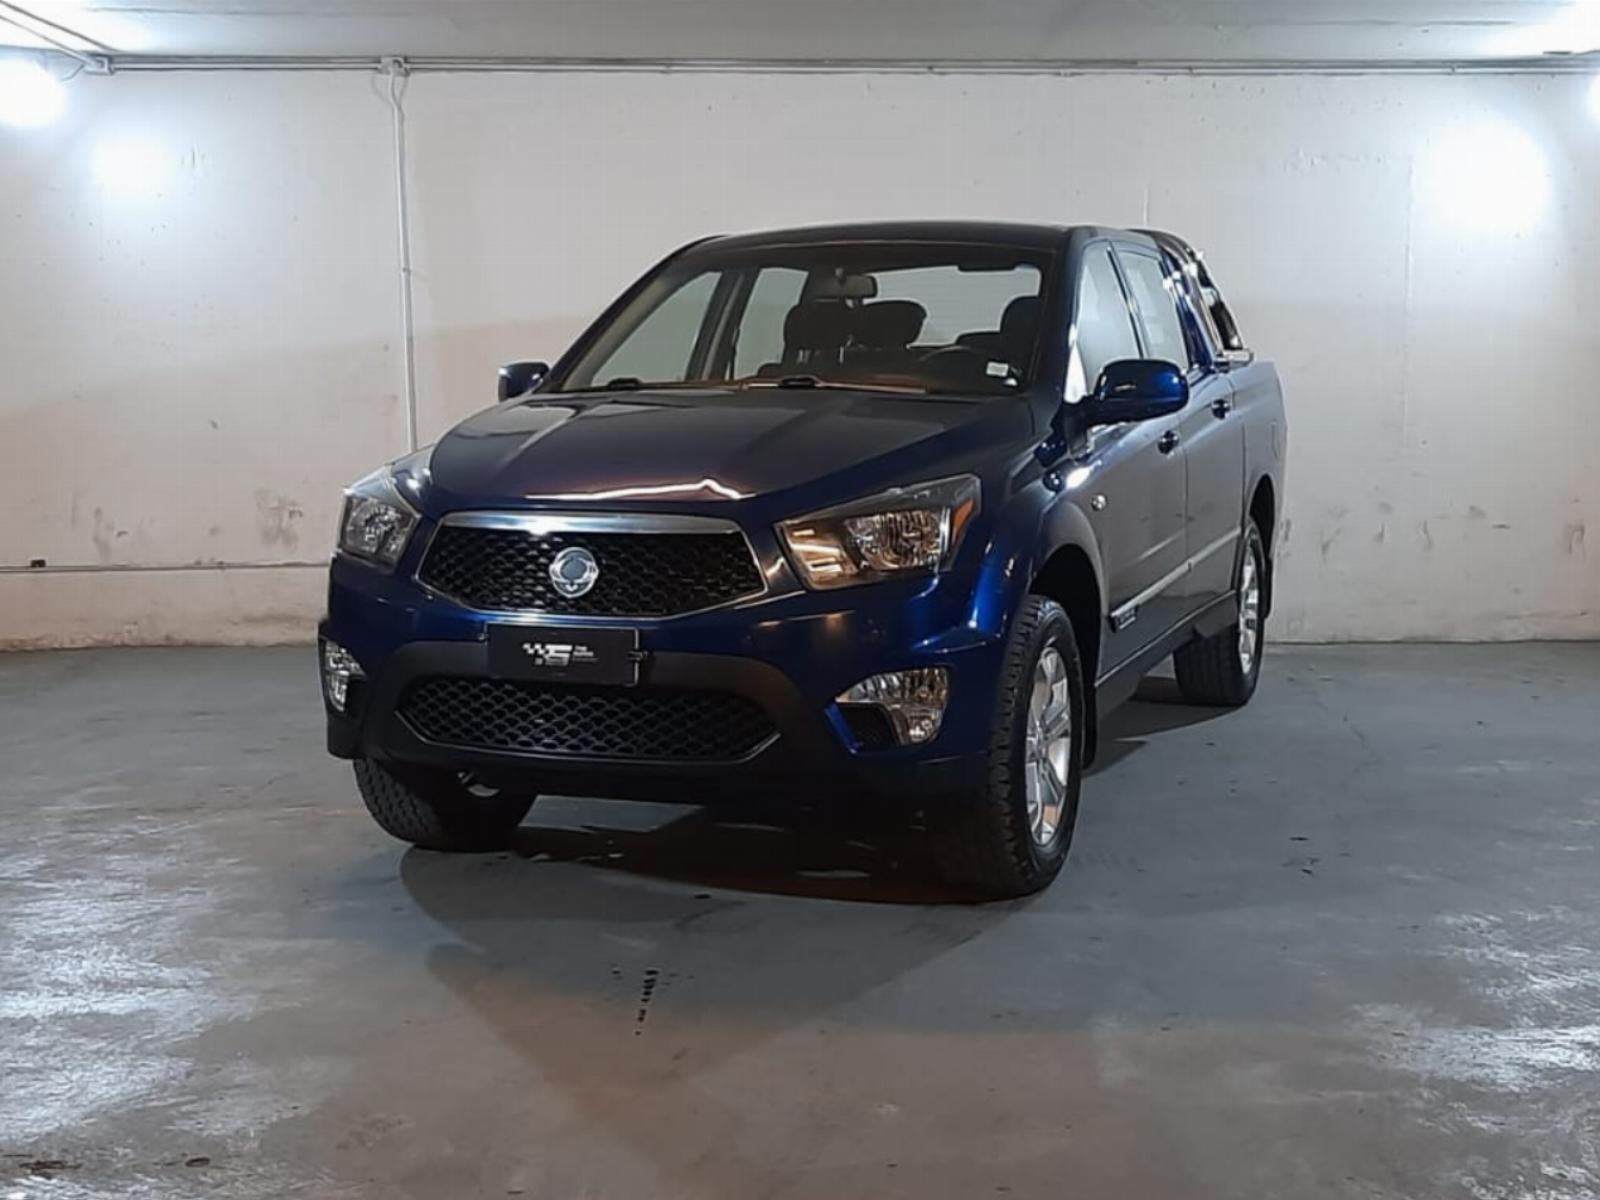 SSANGYONG ACTYON SPORT NEW ACTYON SPORT 4X4 2.0 AT DIESEL 2013  - FULL MOTOR